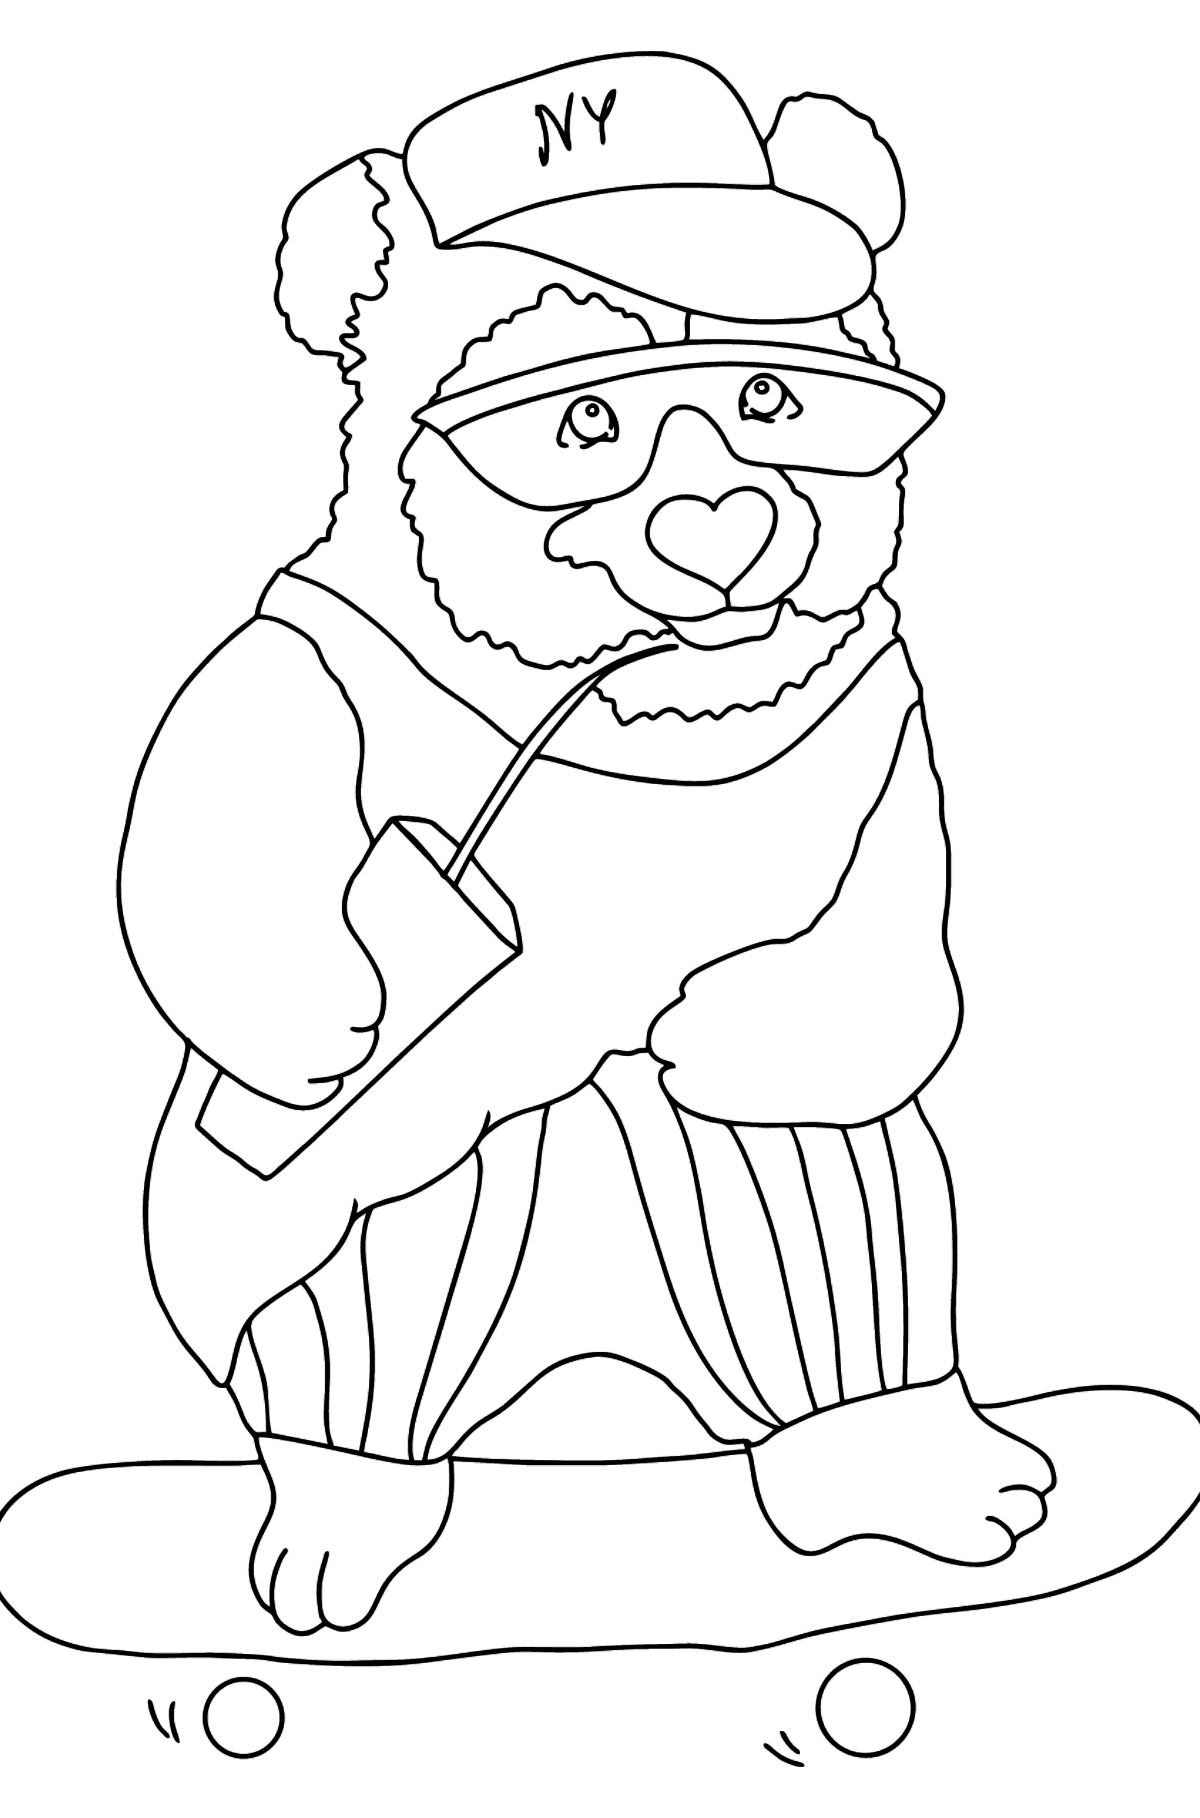 Coloring Page - A Panda in Sunglasses - Coloring Pages for Kids